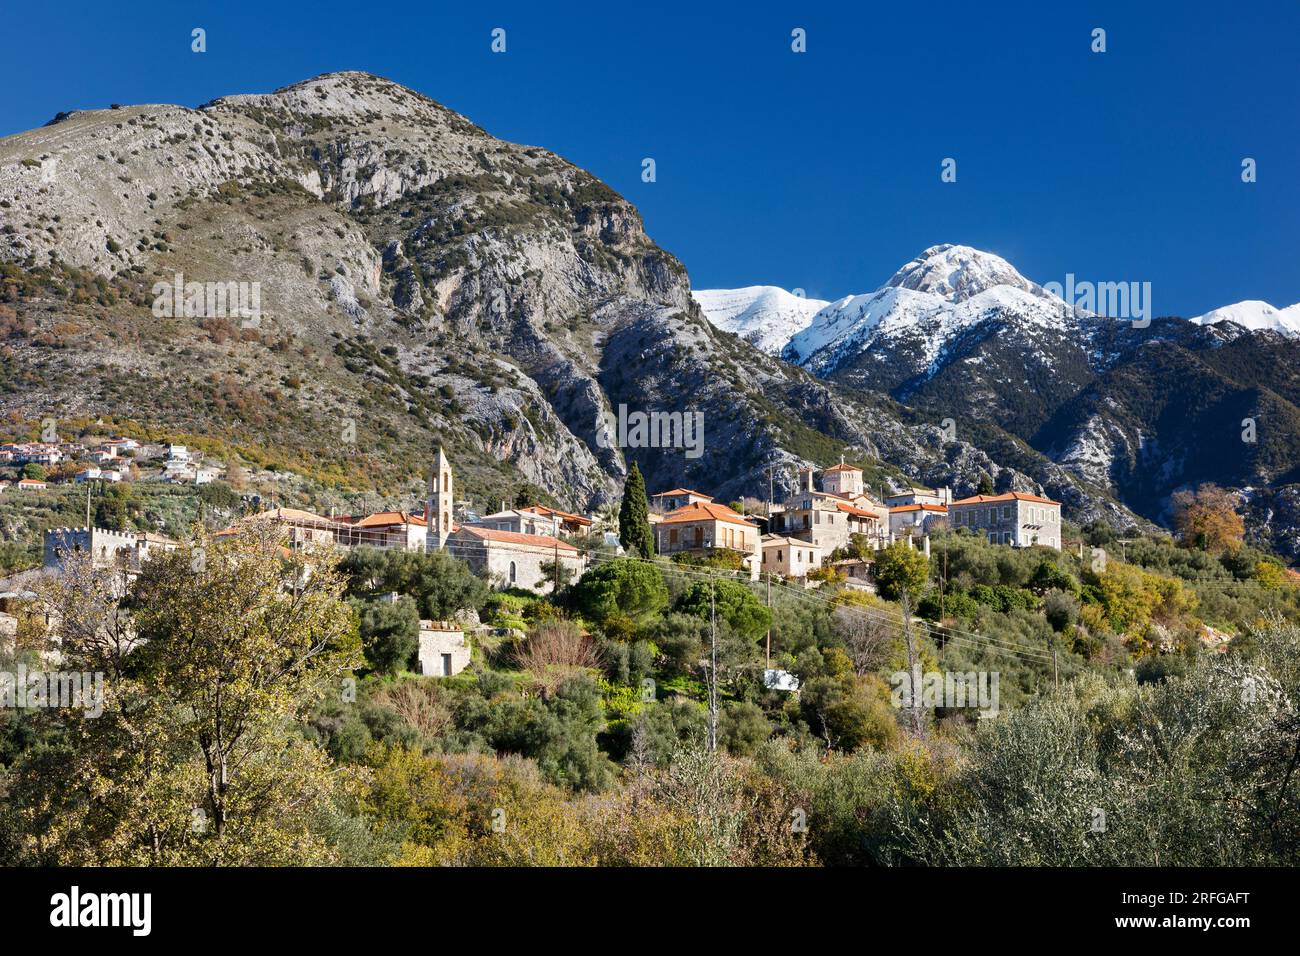 The village of Chora in Exochori in the Mani peninsula of Greece with the Taygetos mountain range beyond. Stock Photo